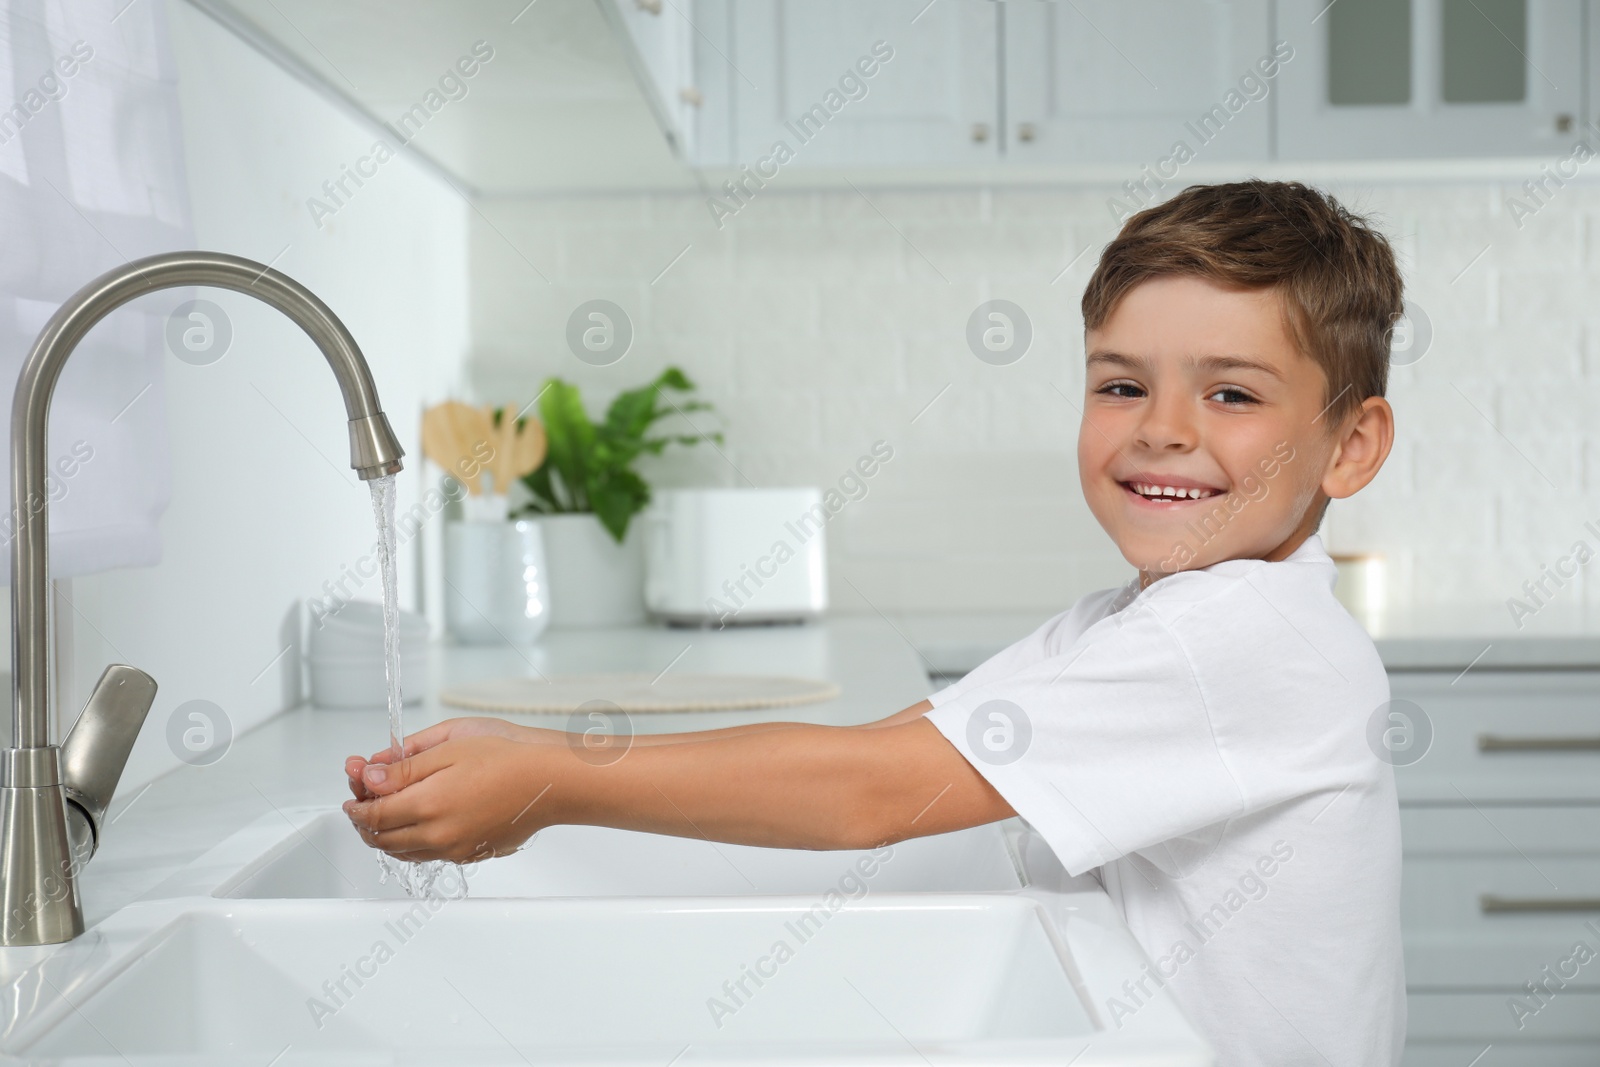 Photo of Boy holding hands under water running from tap in kitchen